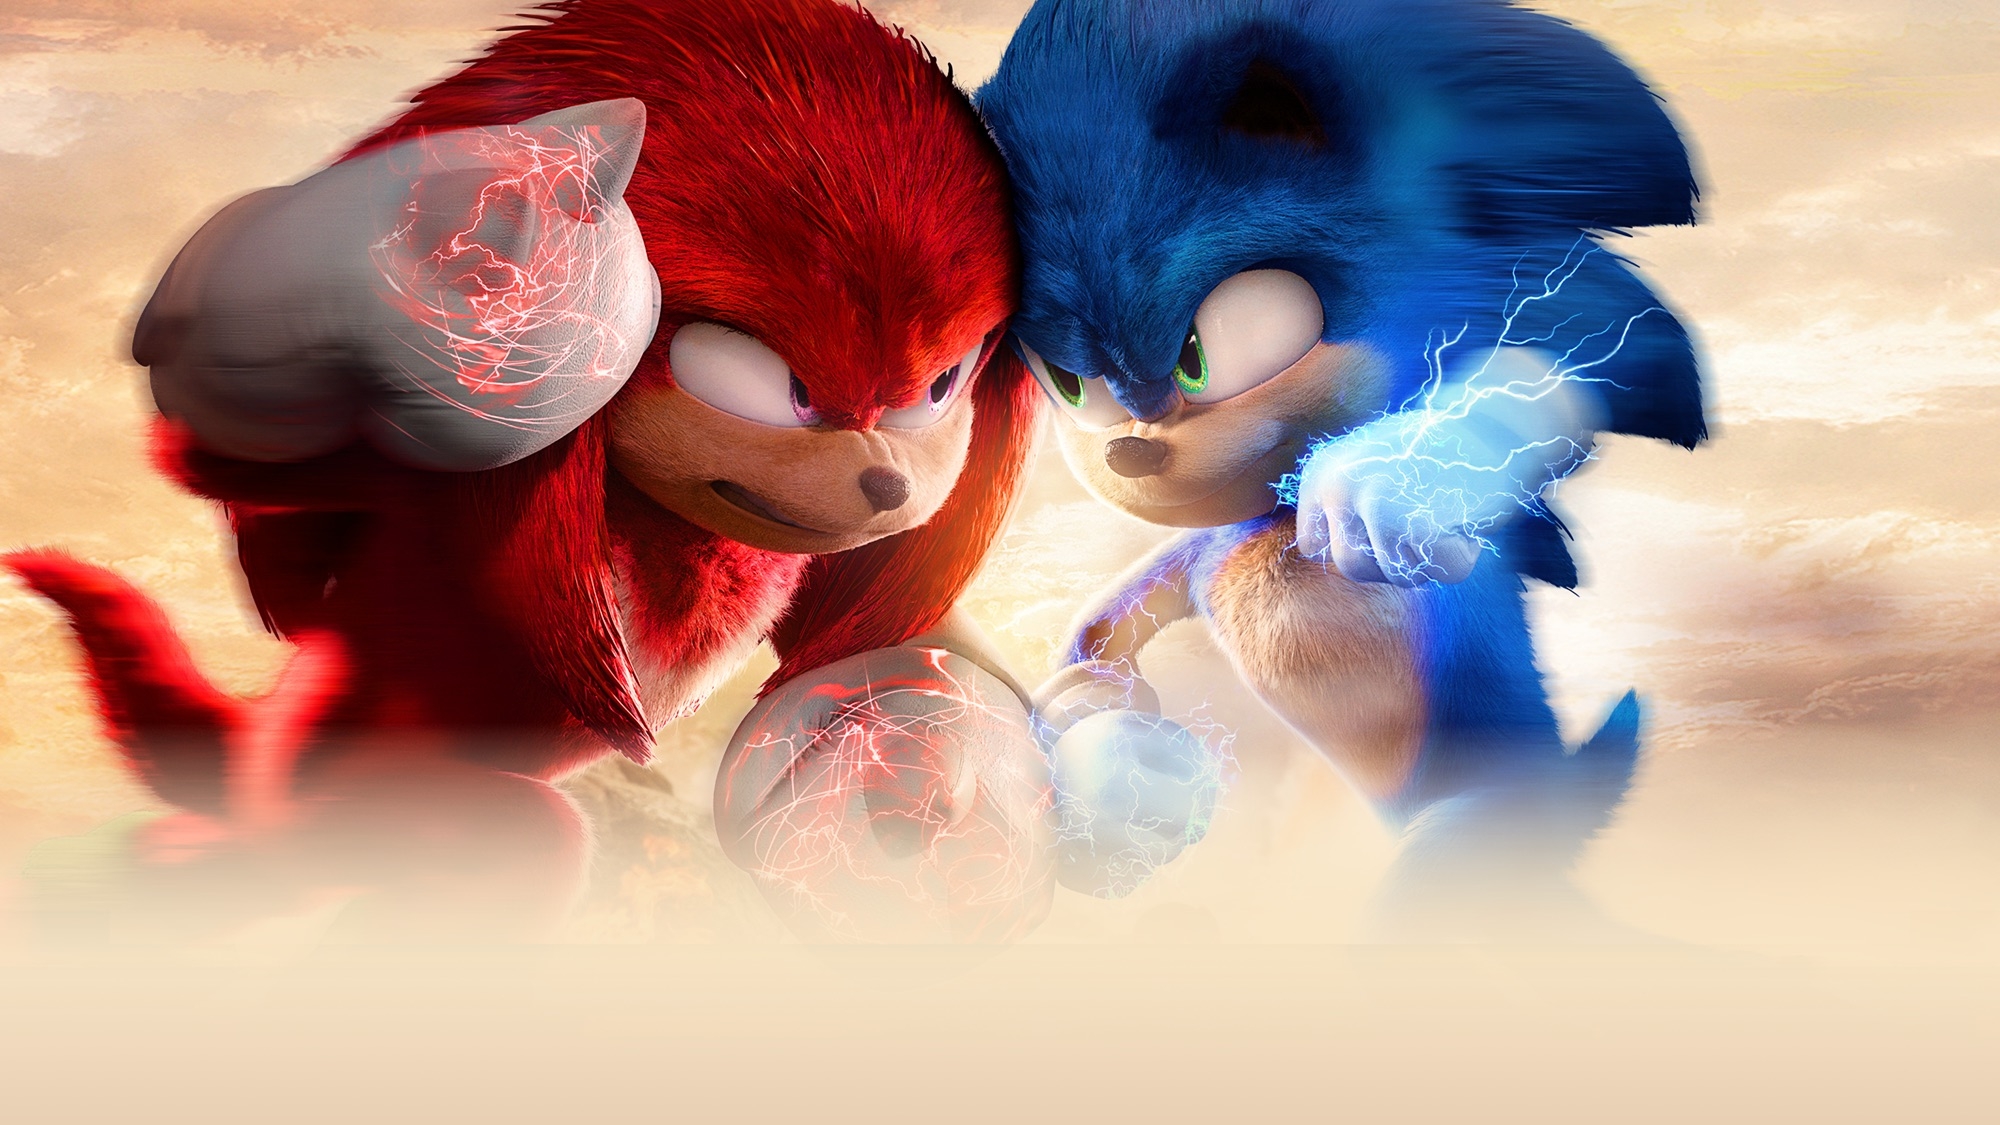 1920x1080202149 Sonic The Hedgehog Vs Knuckles The Echidna 1920x1080202149 Resolution Wallpaper